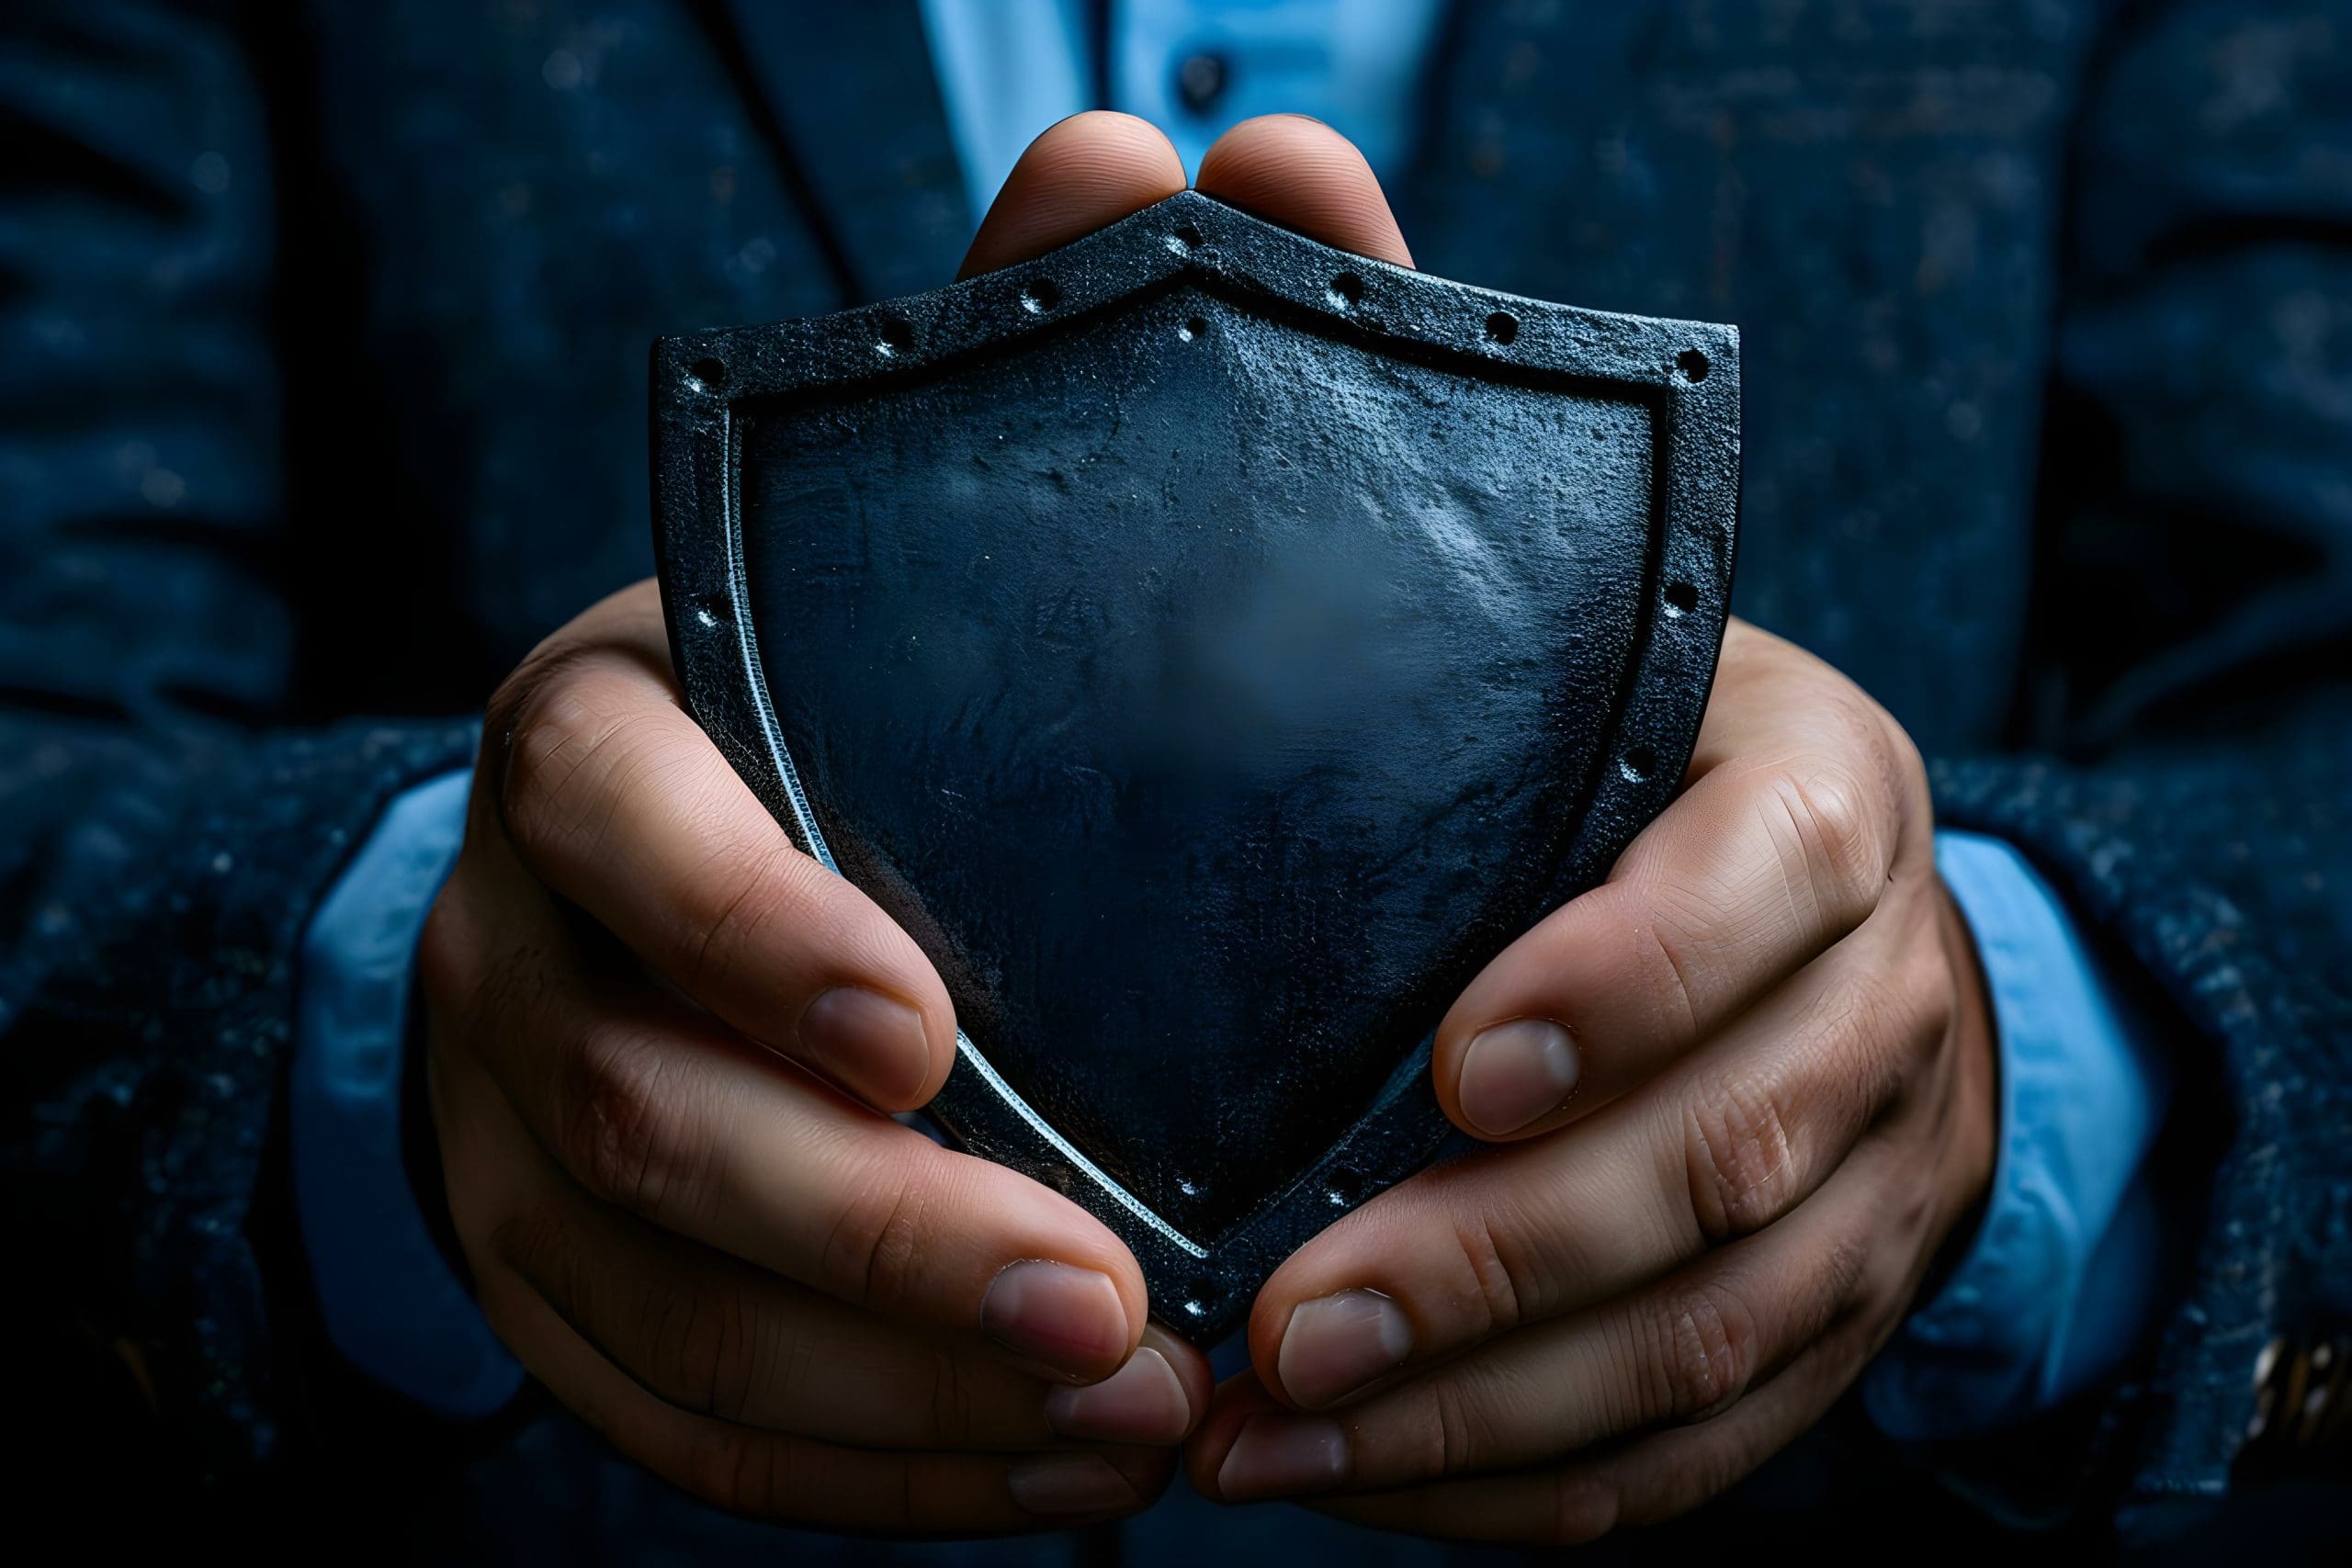 A person in a dark suit holds a metallic shield emblem, symbolizing protection or authority, with their hands gently cupping it, set against a blue, textured background.